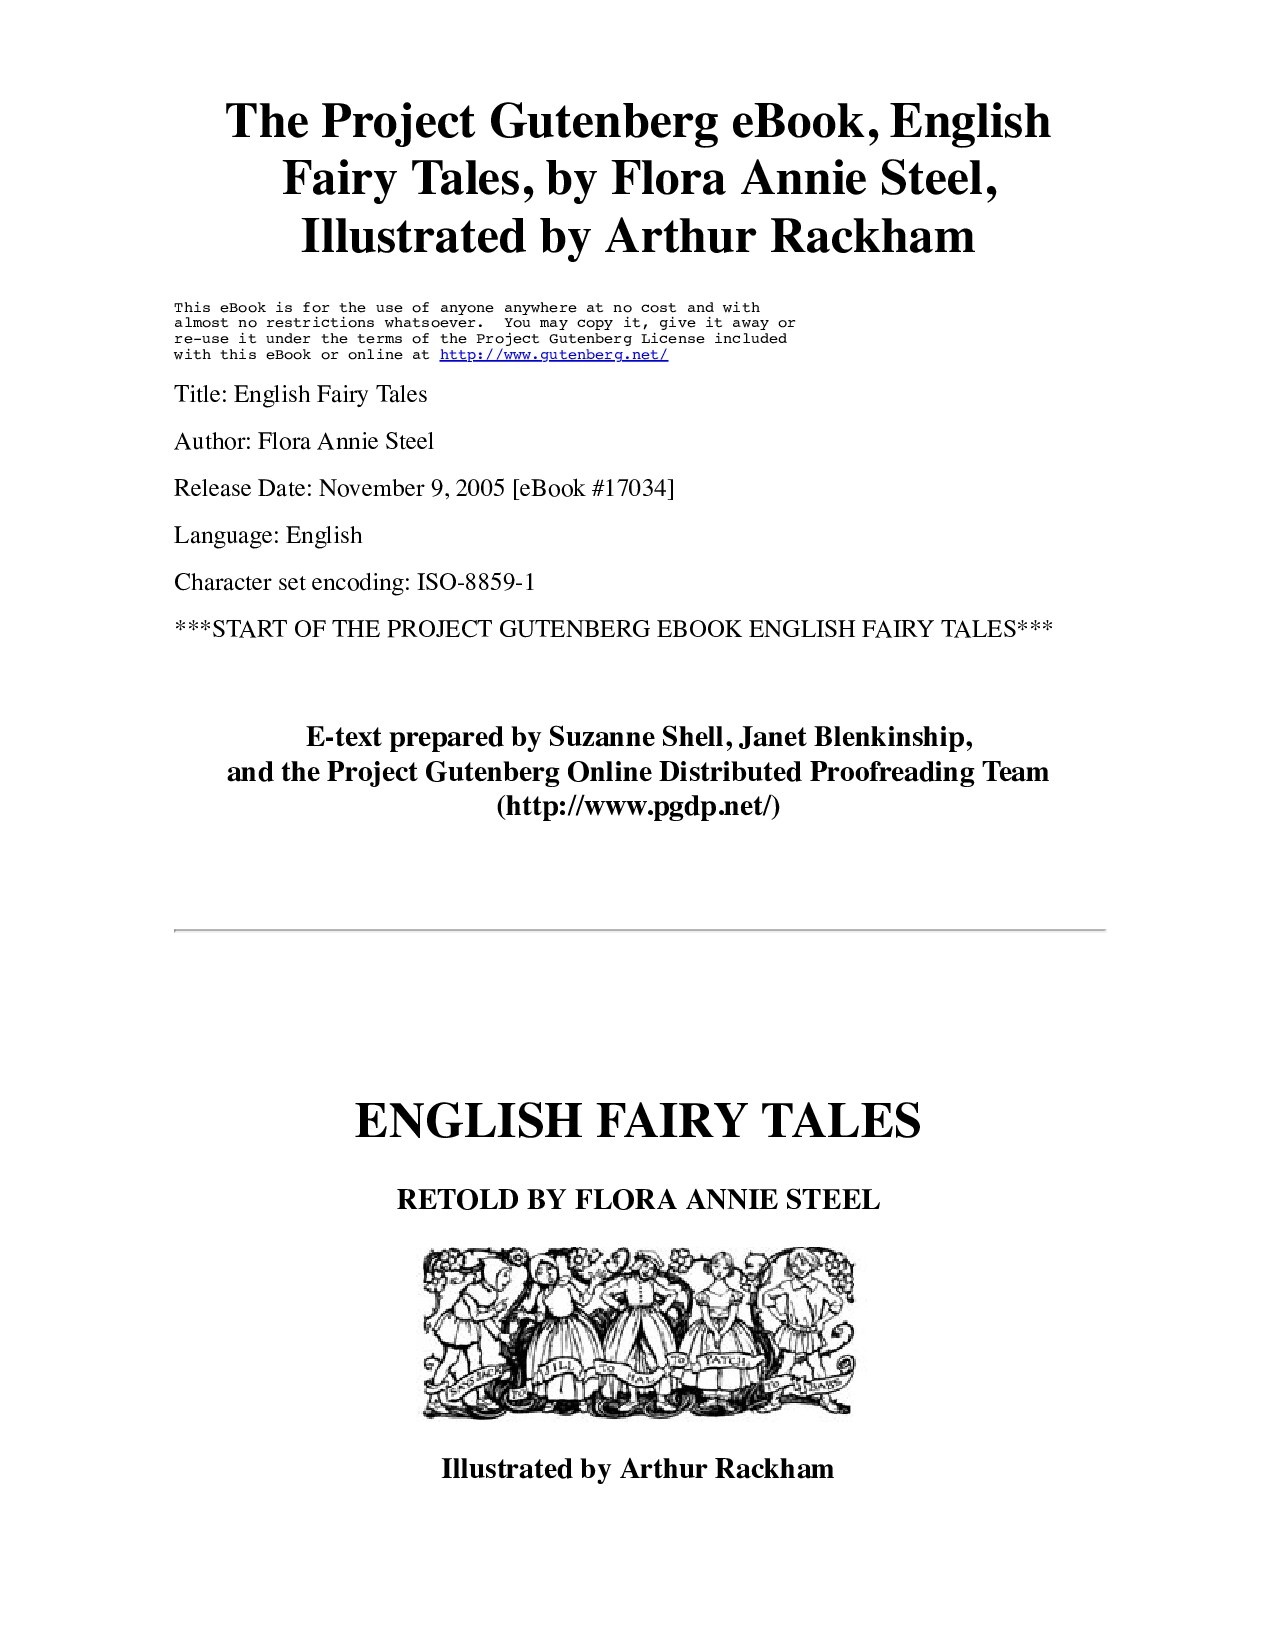 The Project Gutenberg eBook of English Fairy Tales, by Flora Annie Steel